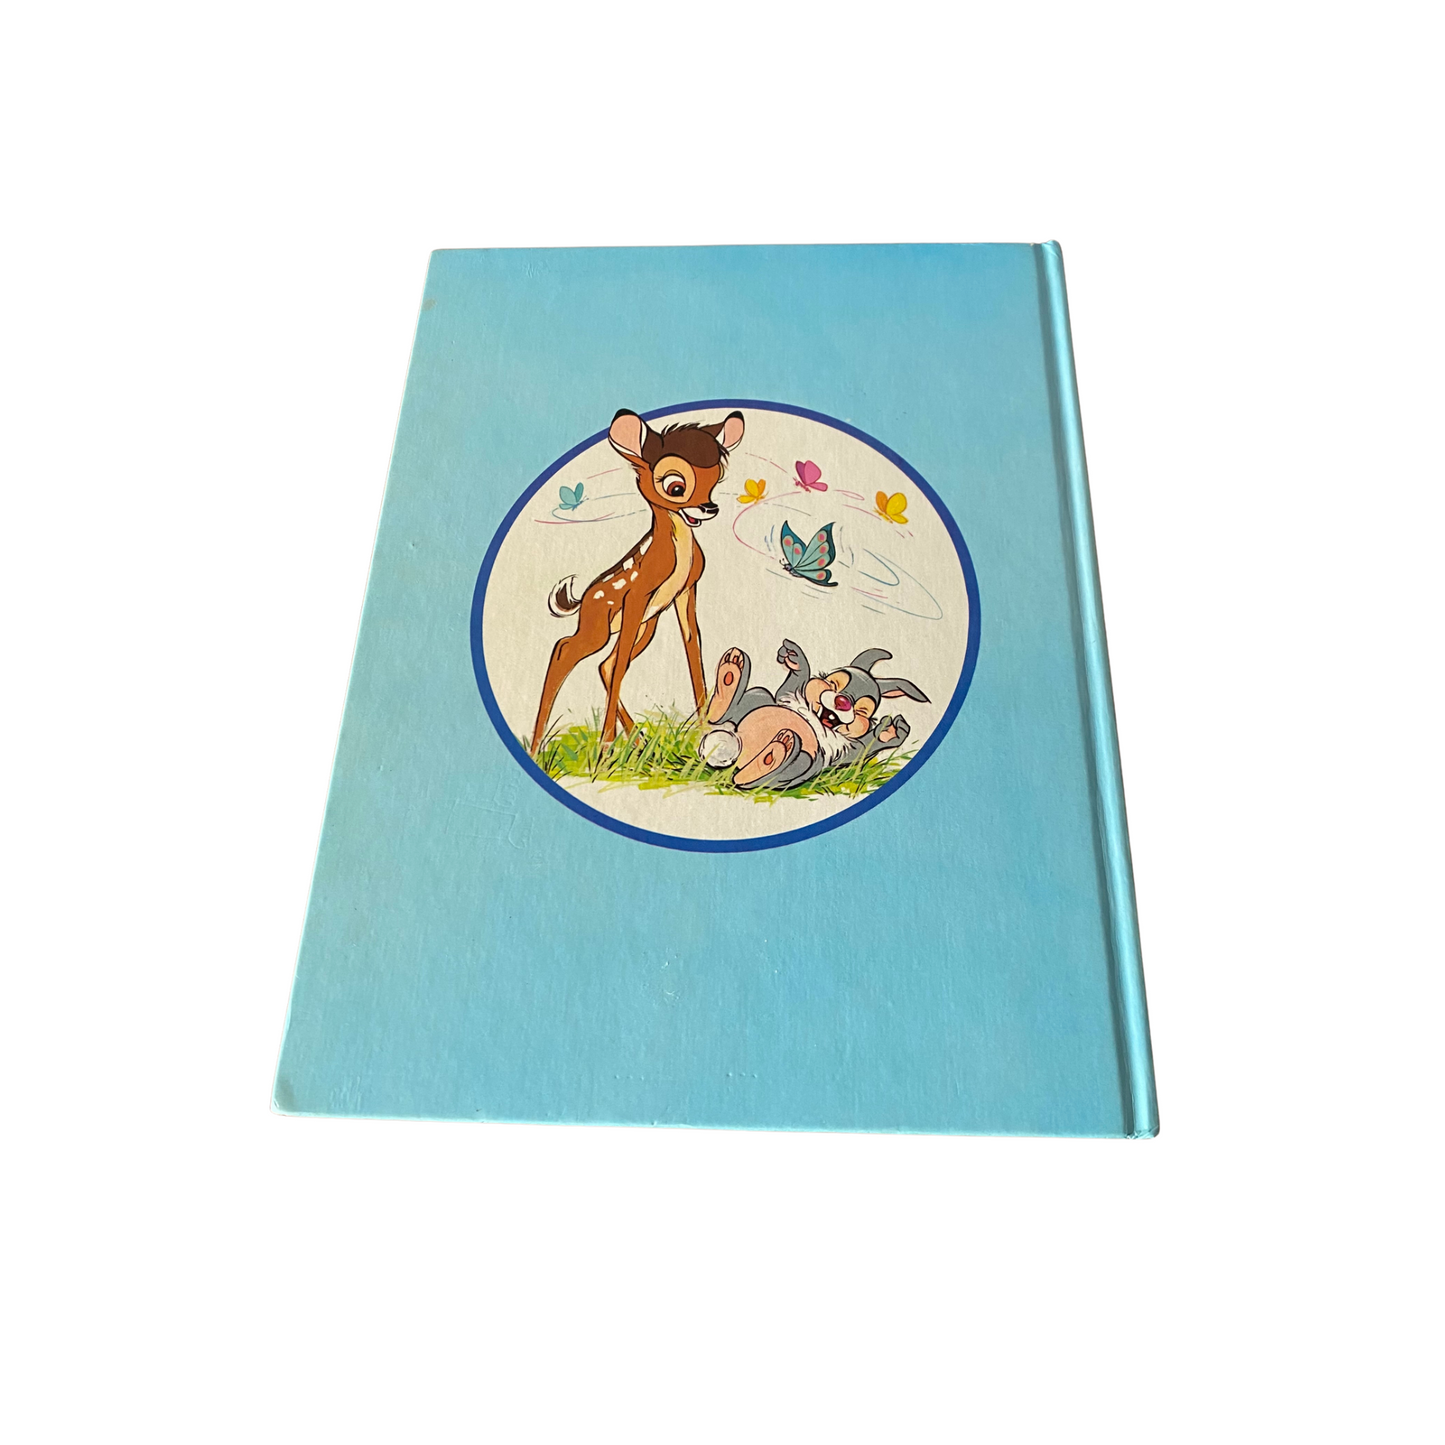 The St Michael book  of Bambi Favourites. Hardback picture story  book, 1978 . Great gift idea